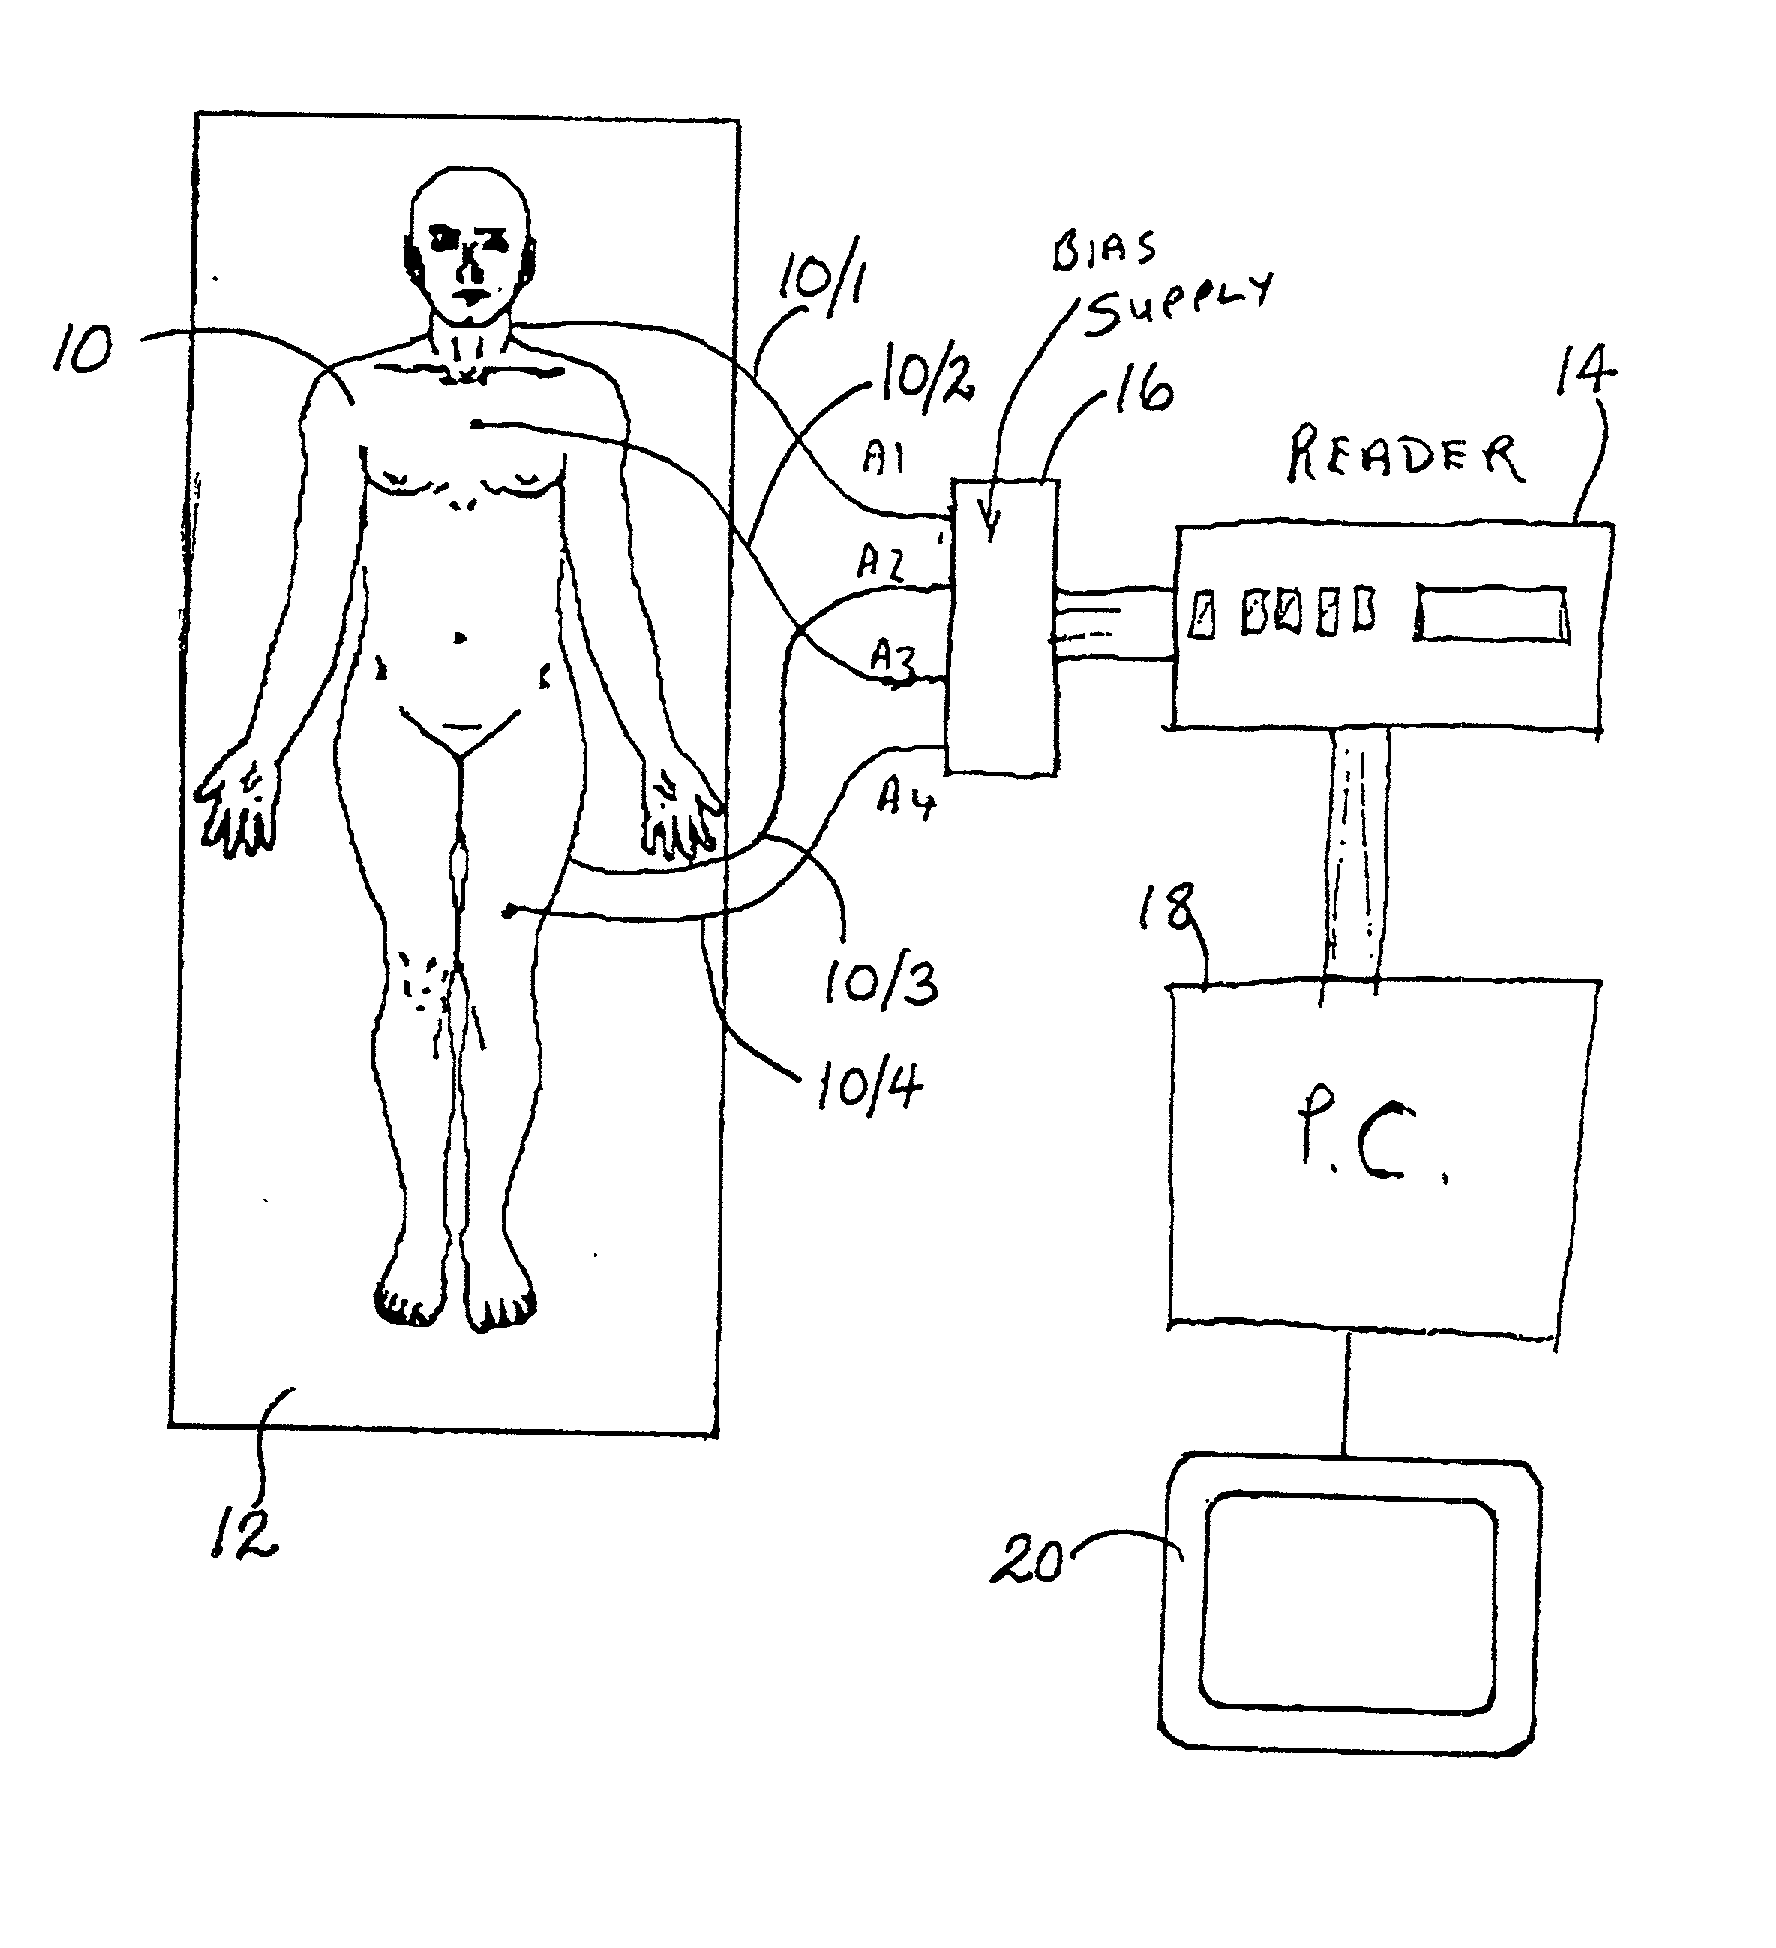 Computer assisted radiotherapy dosimeter system and a method therefor